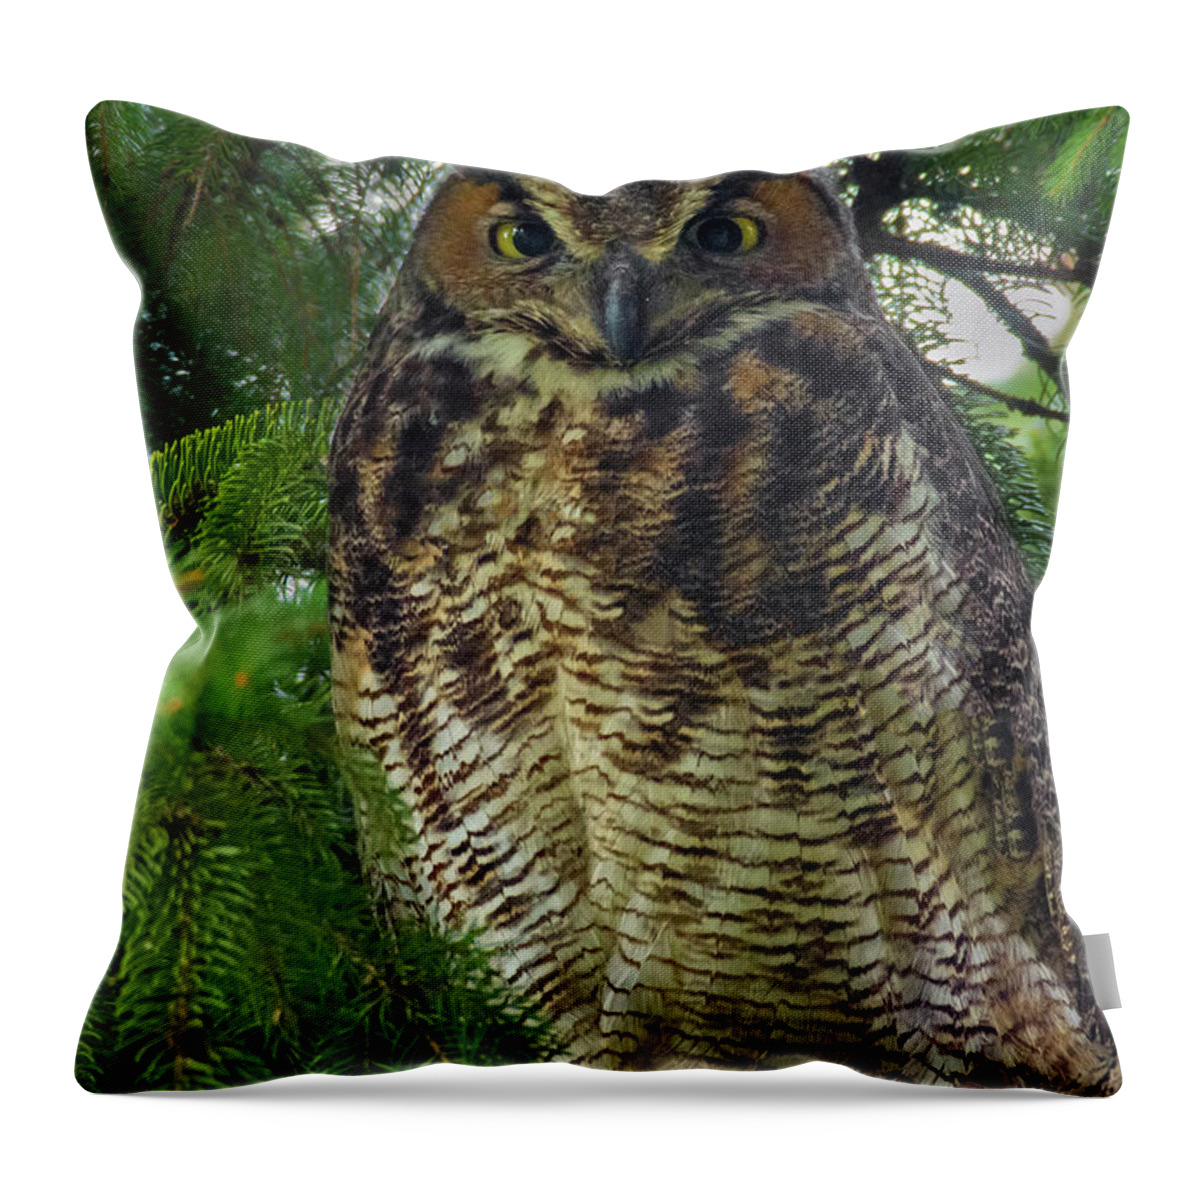 Owl Throw Pillow featuring the photograph Great Horned Owl by Timothy McIntyre